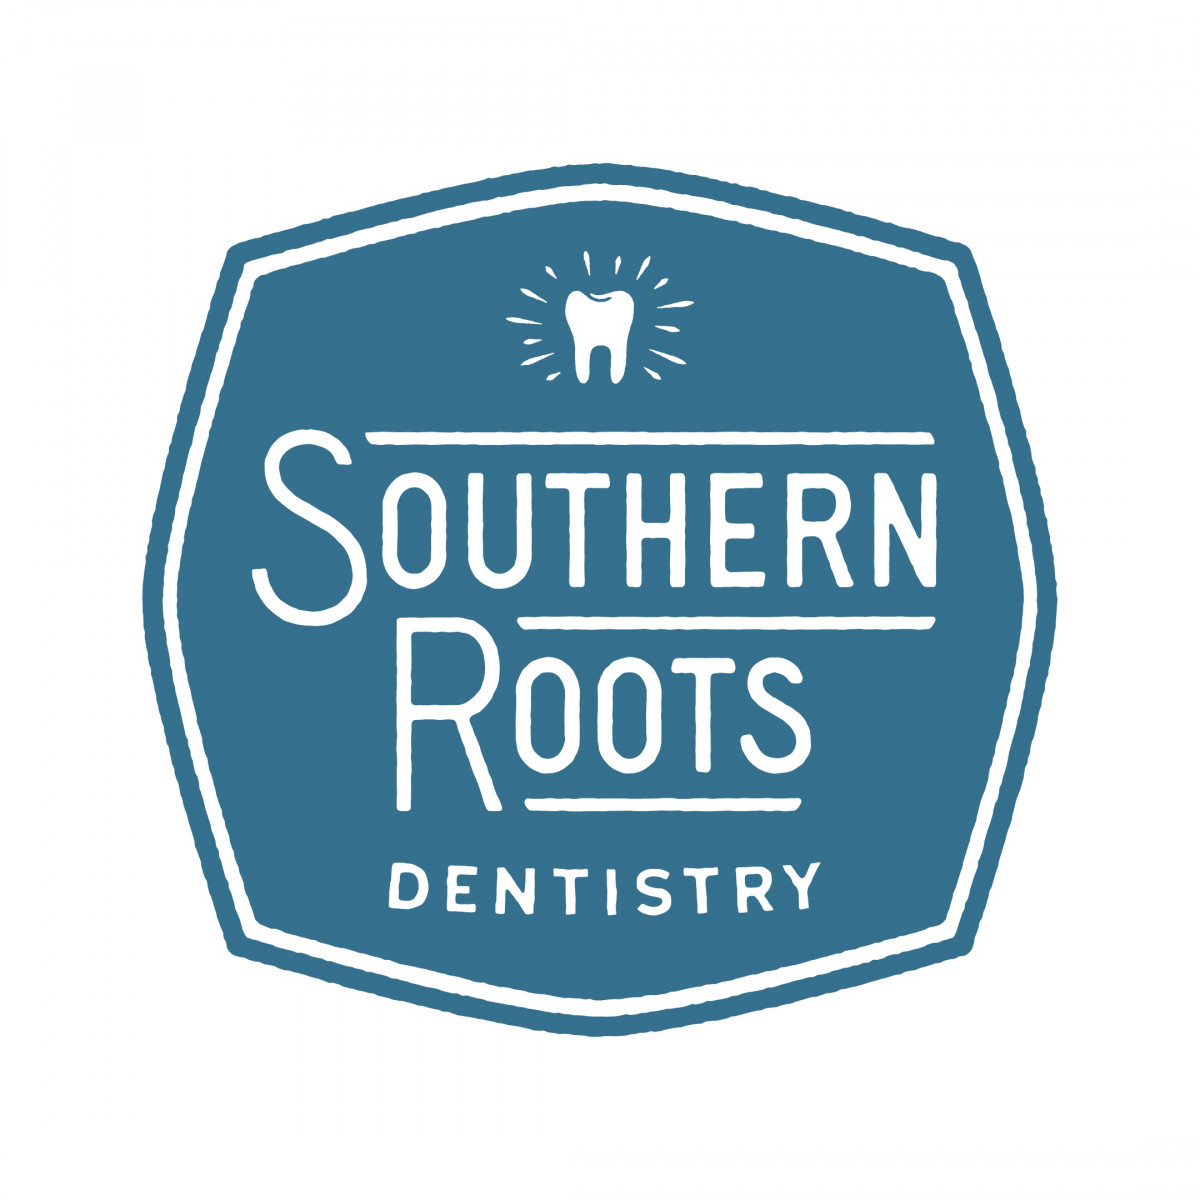 Southern Roots Dentistry - Bossier City, LA